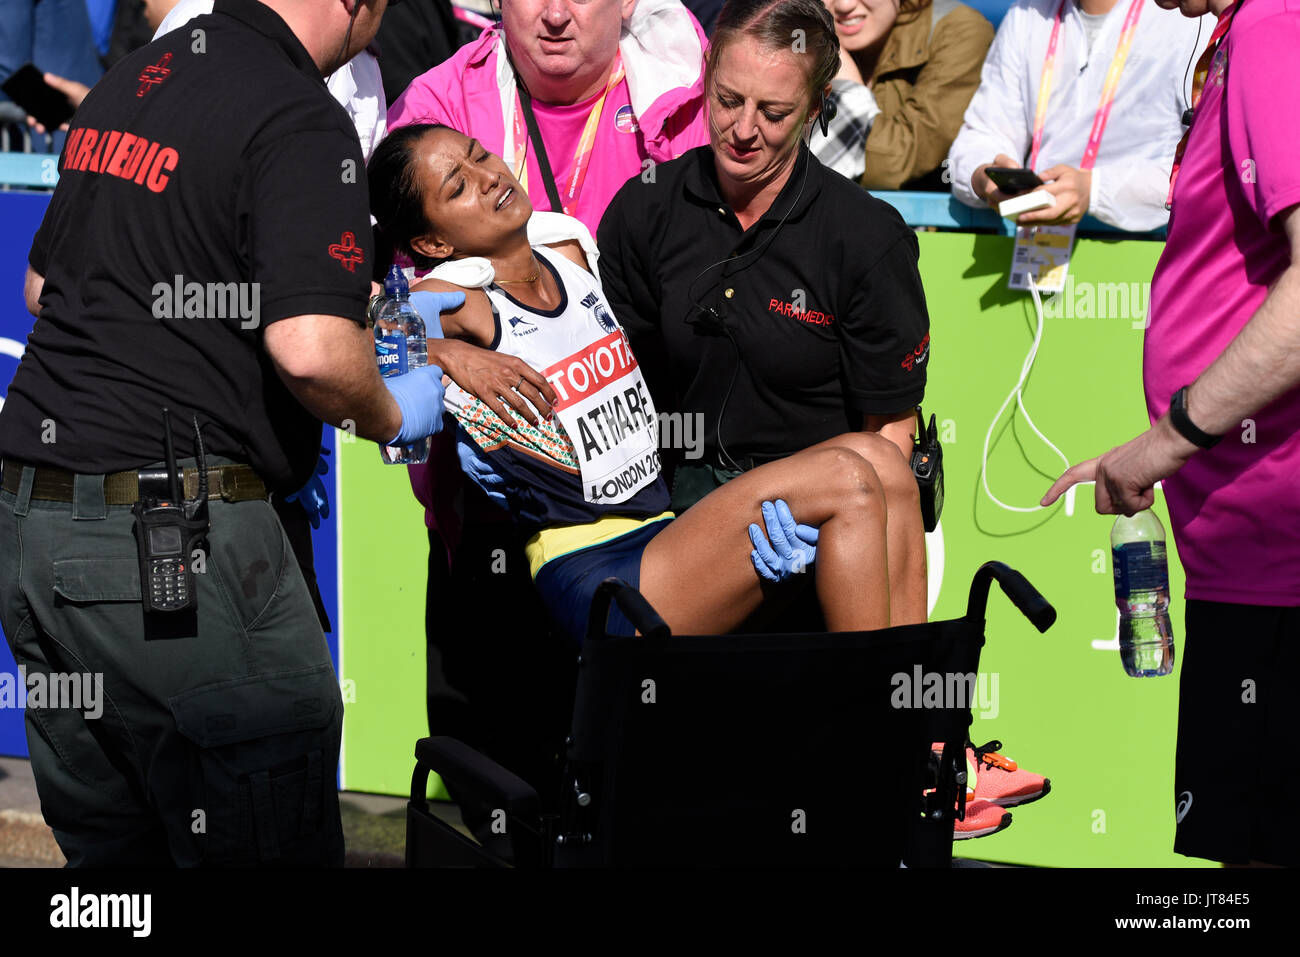 Monika Athare of India collapsed after crossing the finish line at the end of the IAAF World Championships 2017 Marathon race in London UK. Paramedics Stock Photo